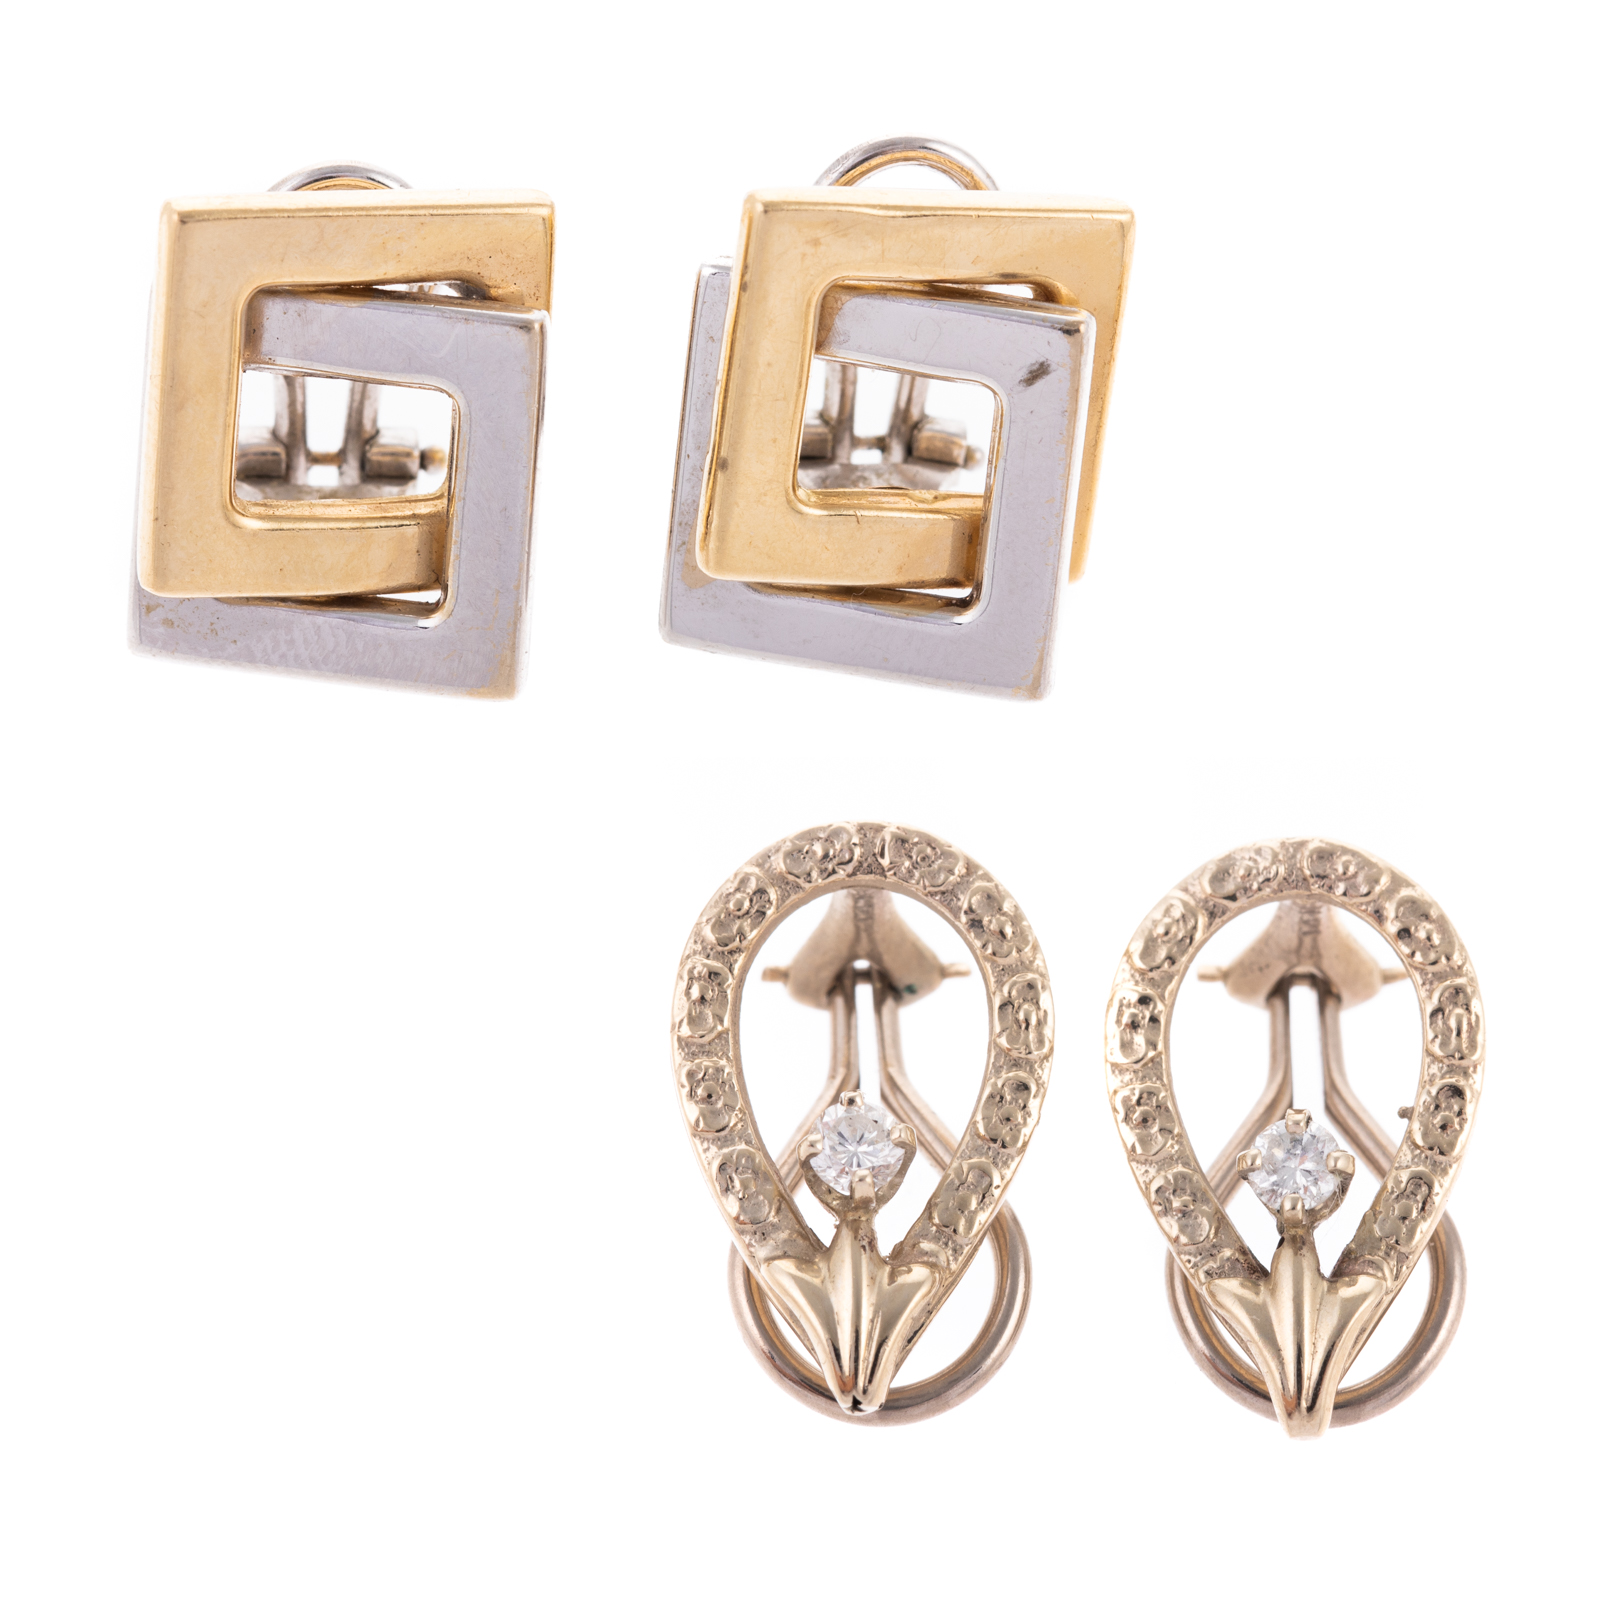 TWO PAIRS OF 14K CONTEMPORARY CLIP 33400d